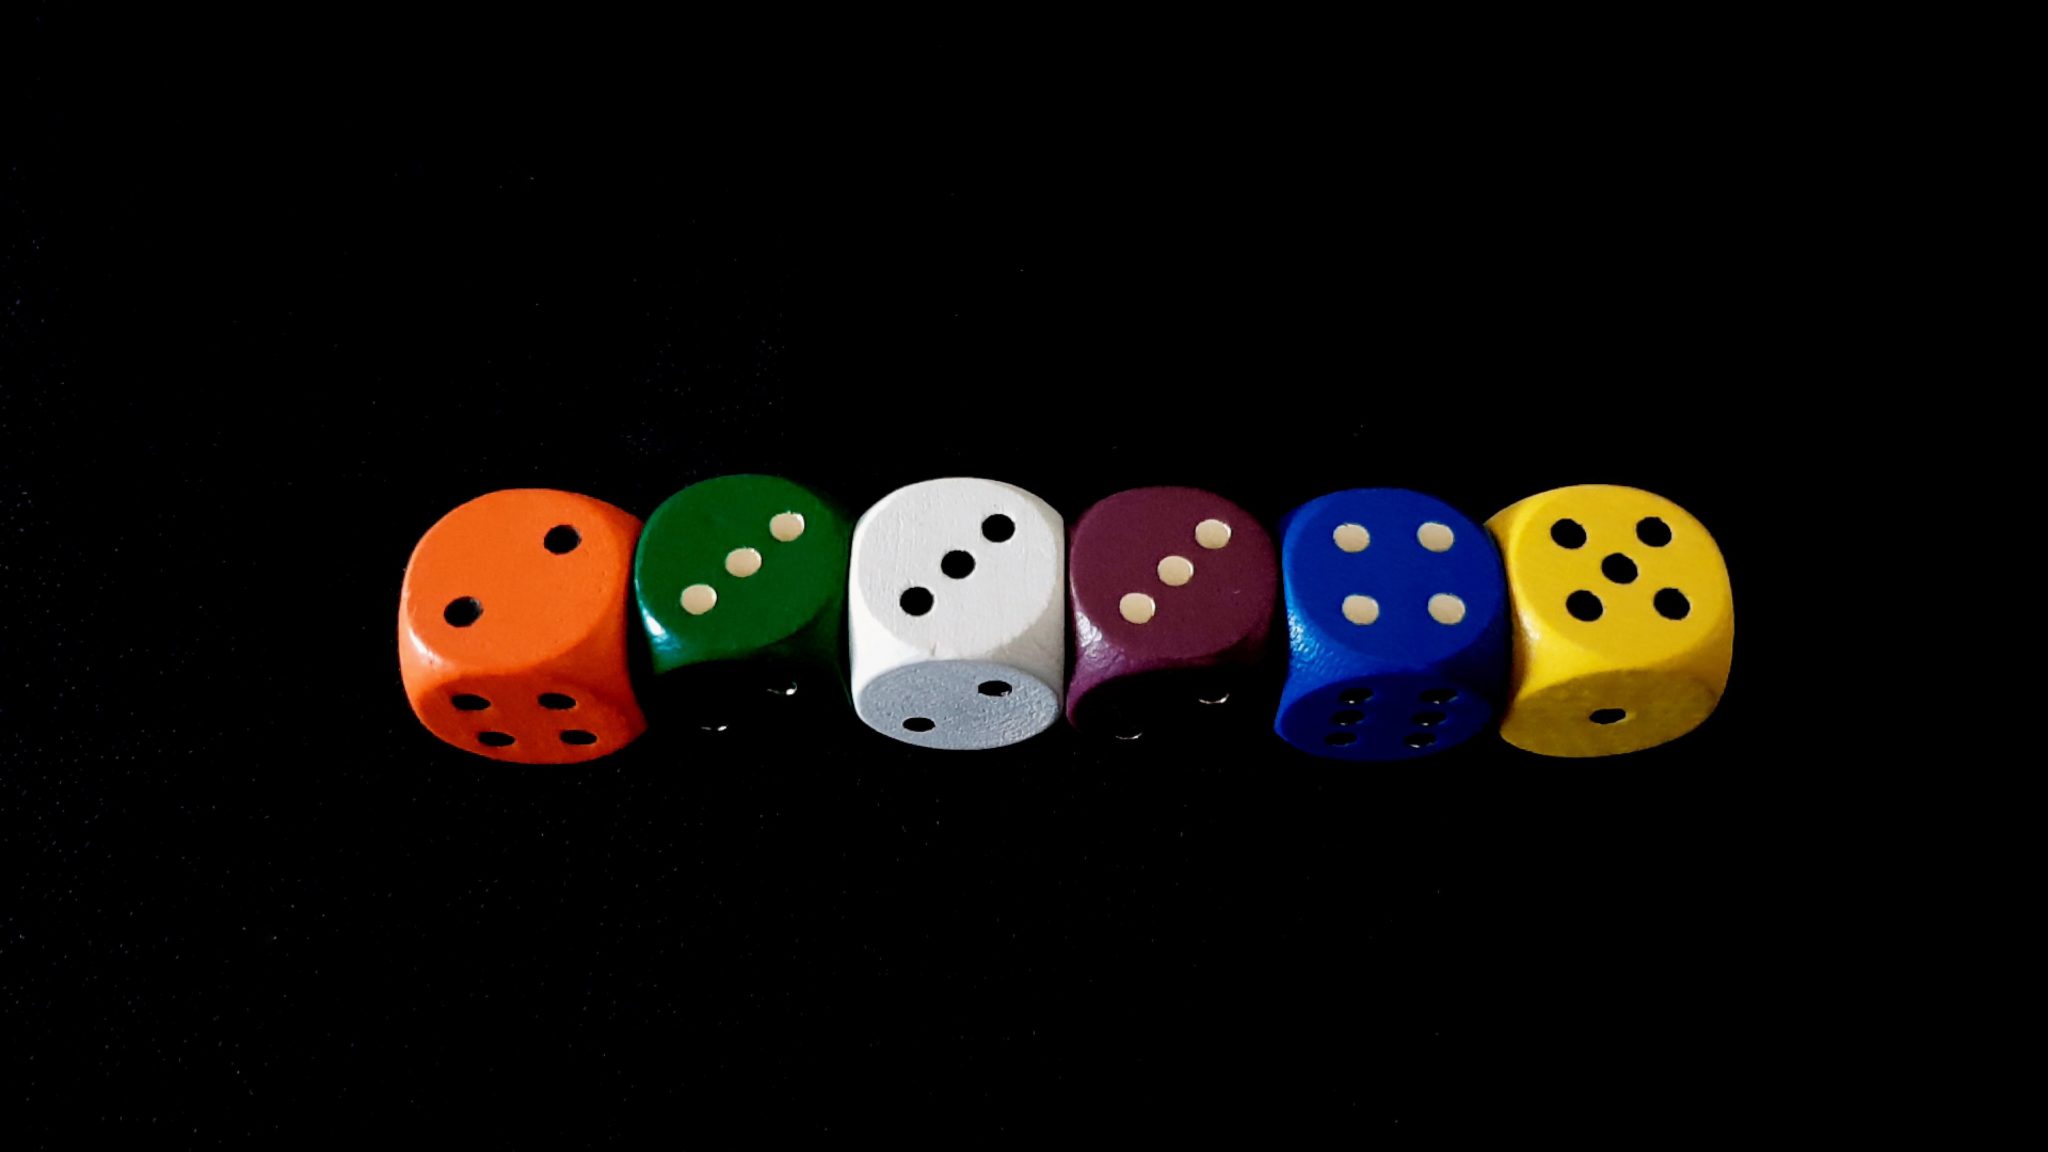 Rolled dice